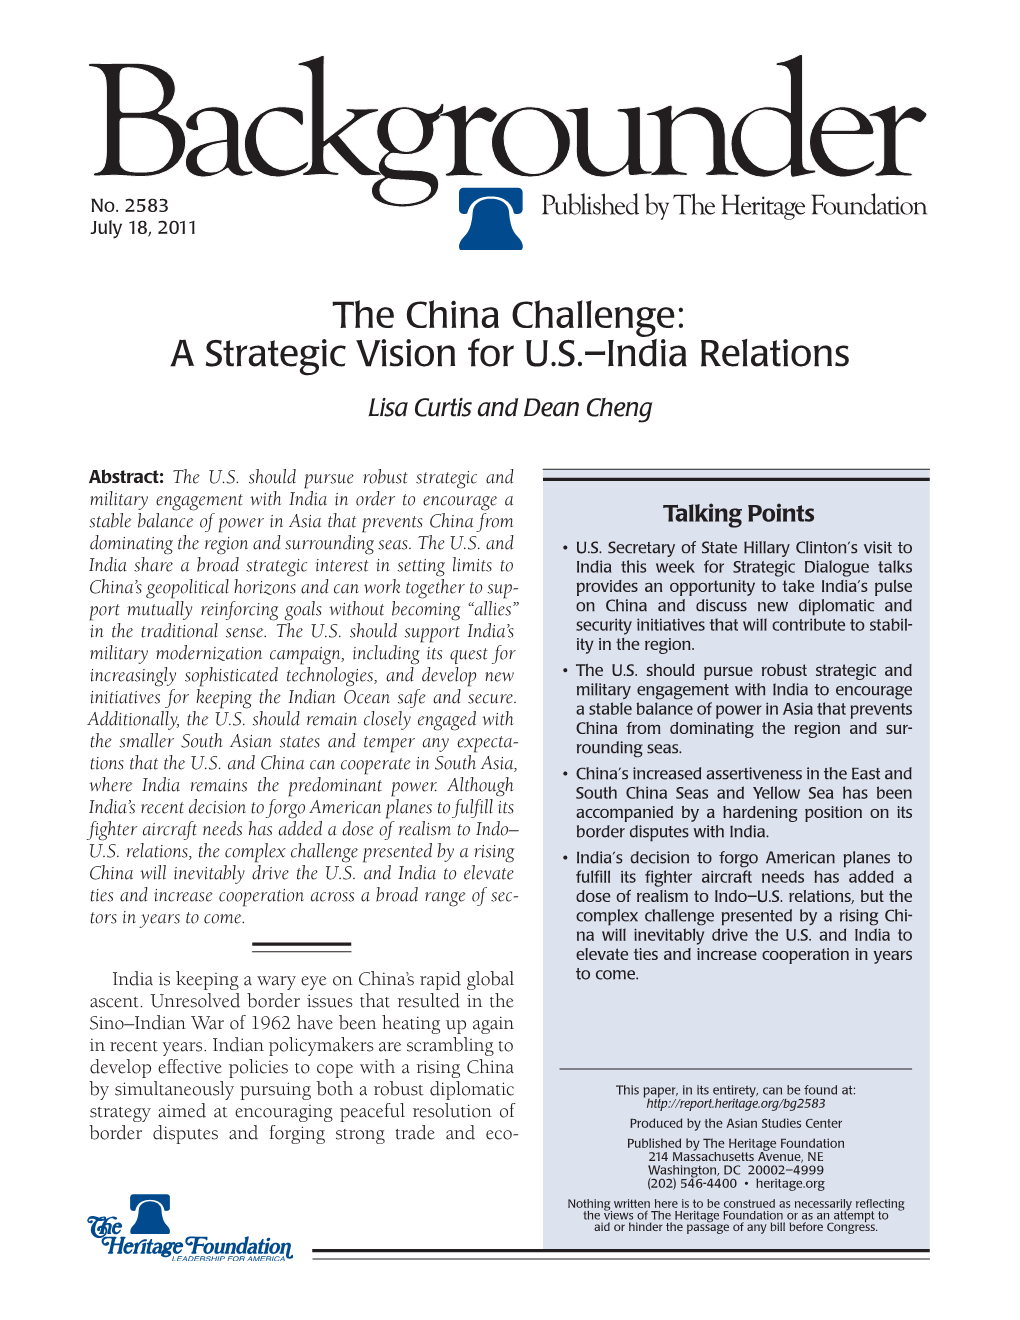 The China Challenge: a Strategic Vision for U.S.–India Relations Lisa Curtis and Dean Cheng